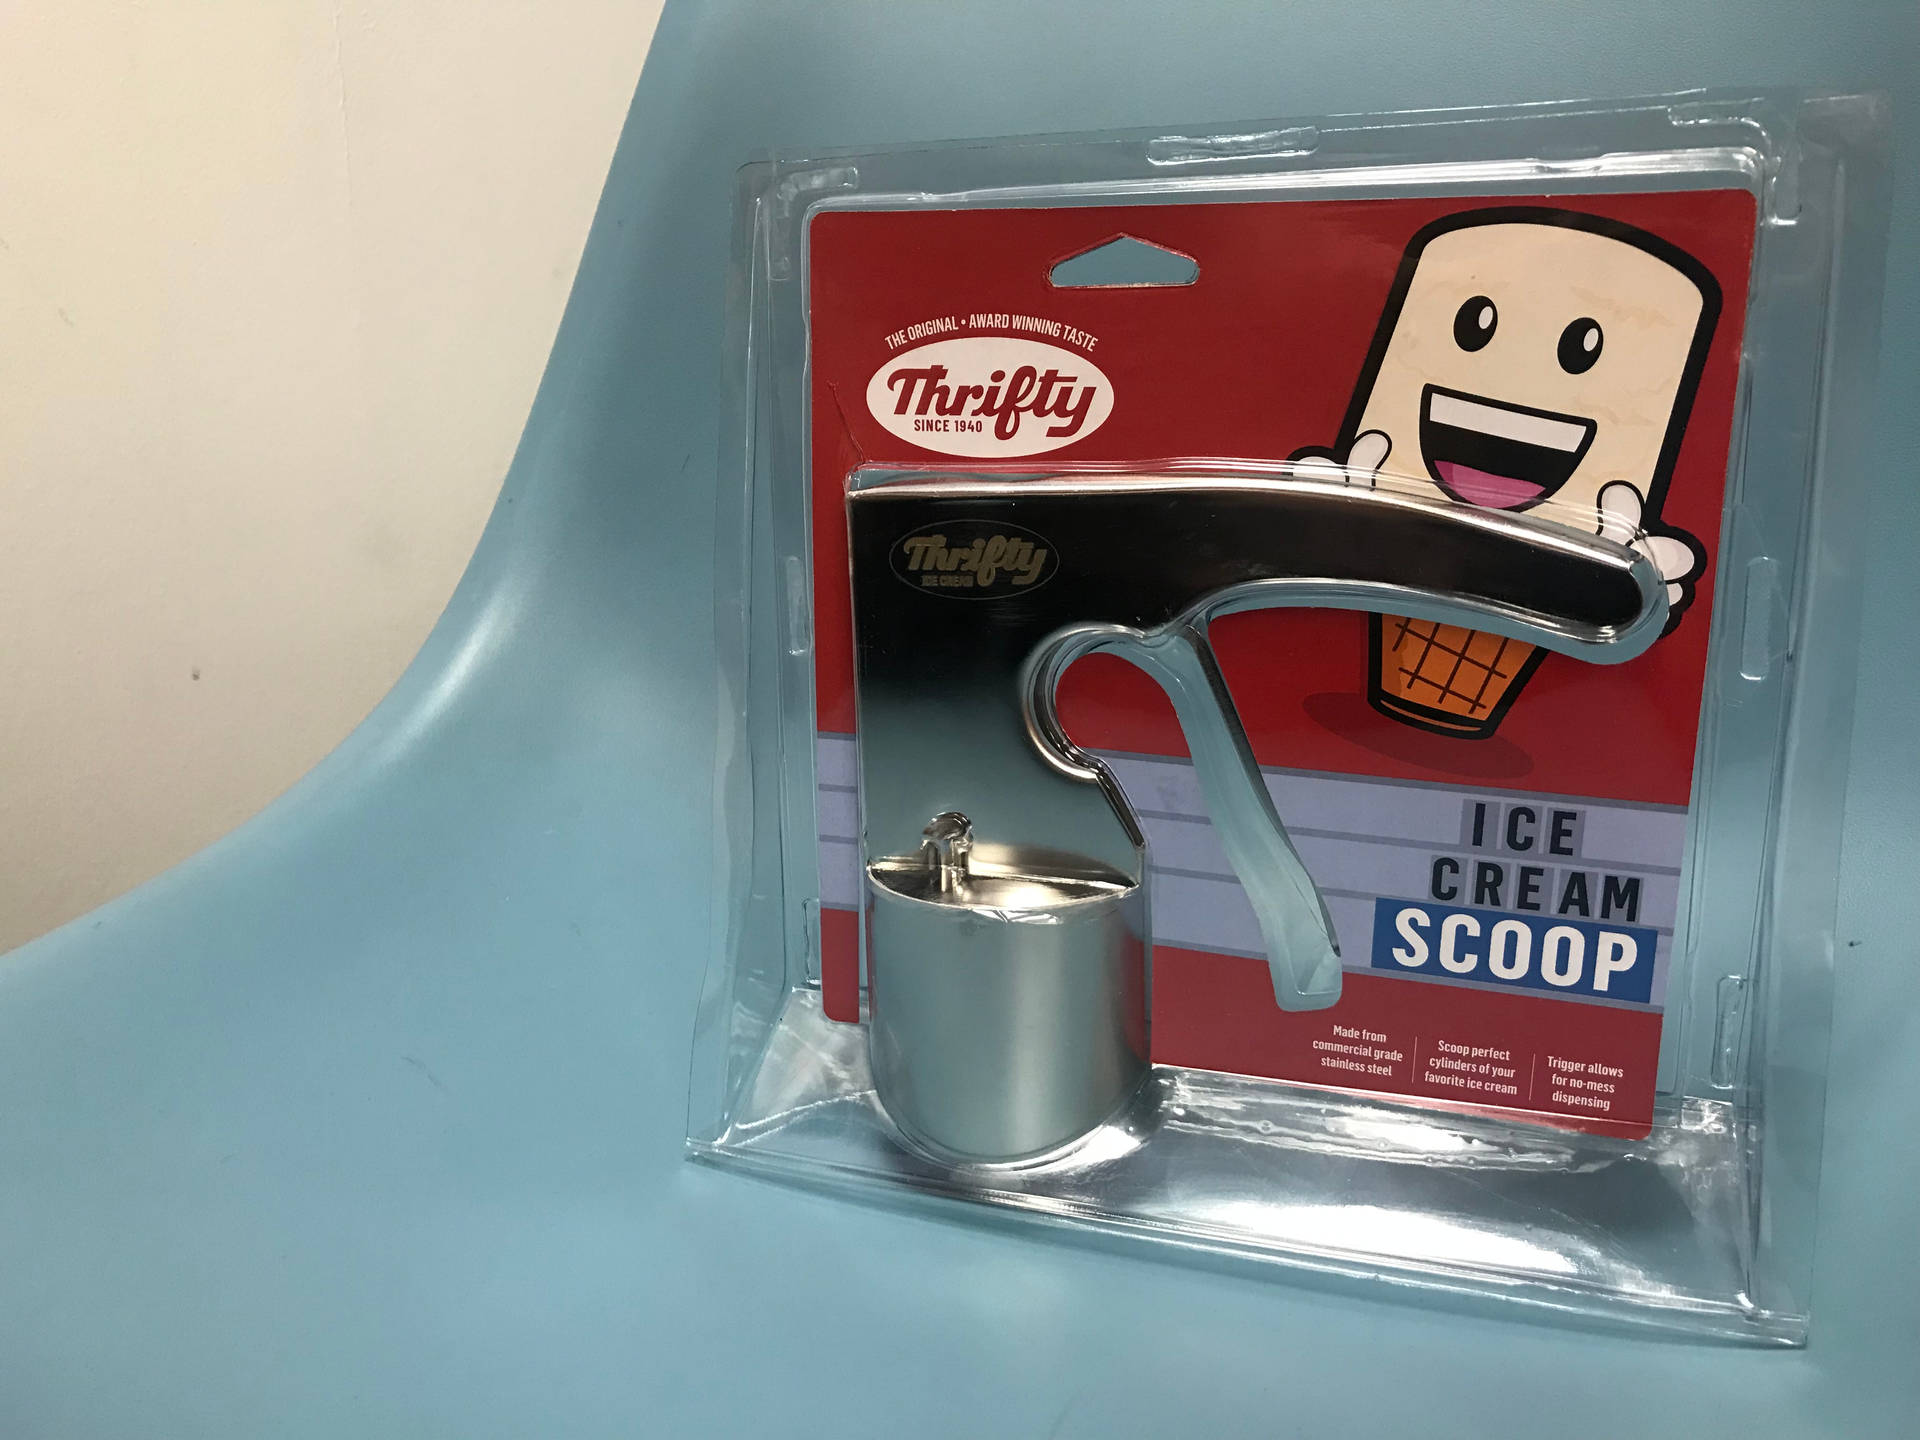 Thrifty Ice Cream Scoop In Pack Wallpaper